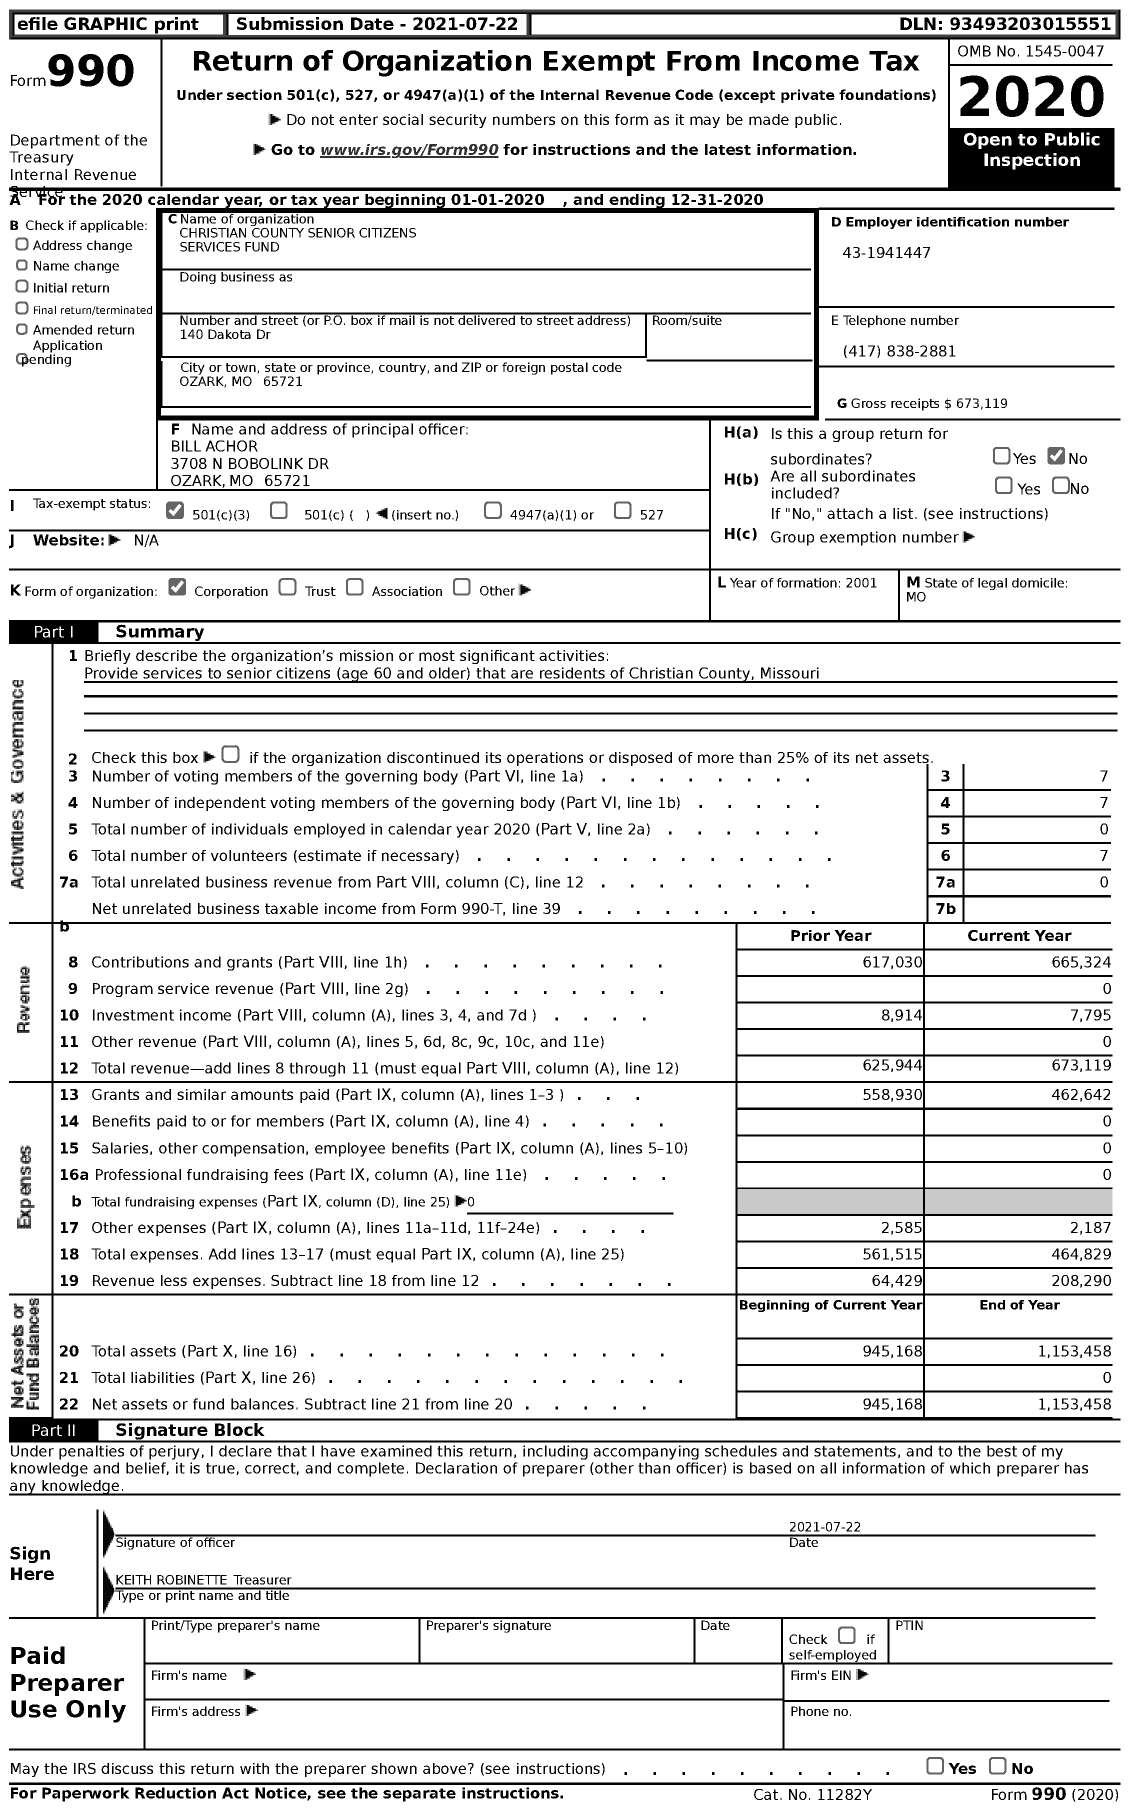 Image of first page of 2020 Form 990 for Christian County Senior Citizens Services Fund